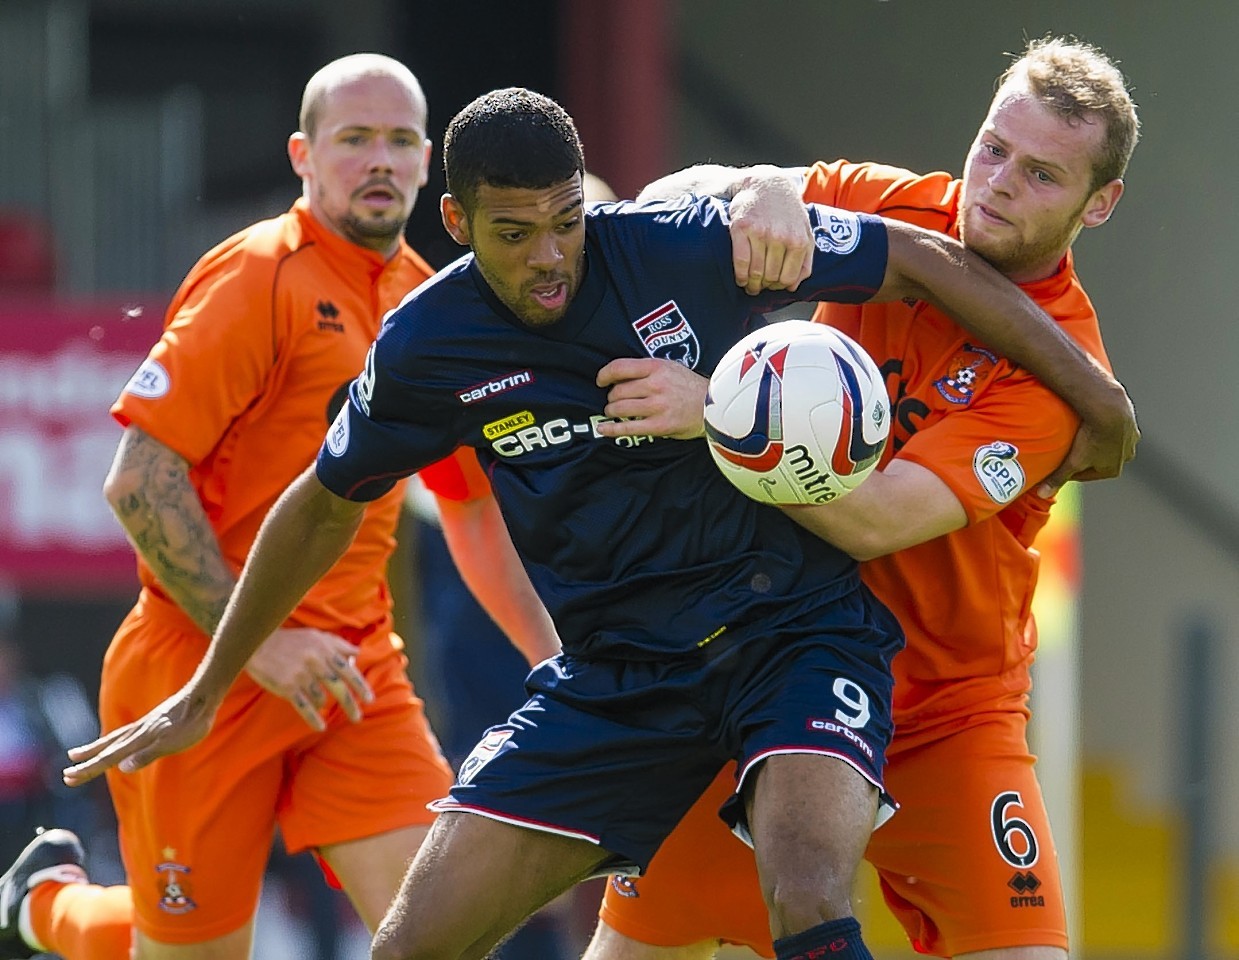 Staggies striker Jake Jervis up against Kilmarnock's Mark Connolly